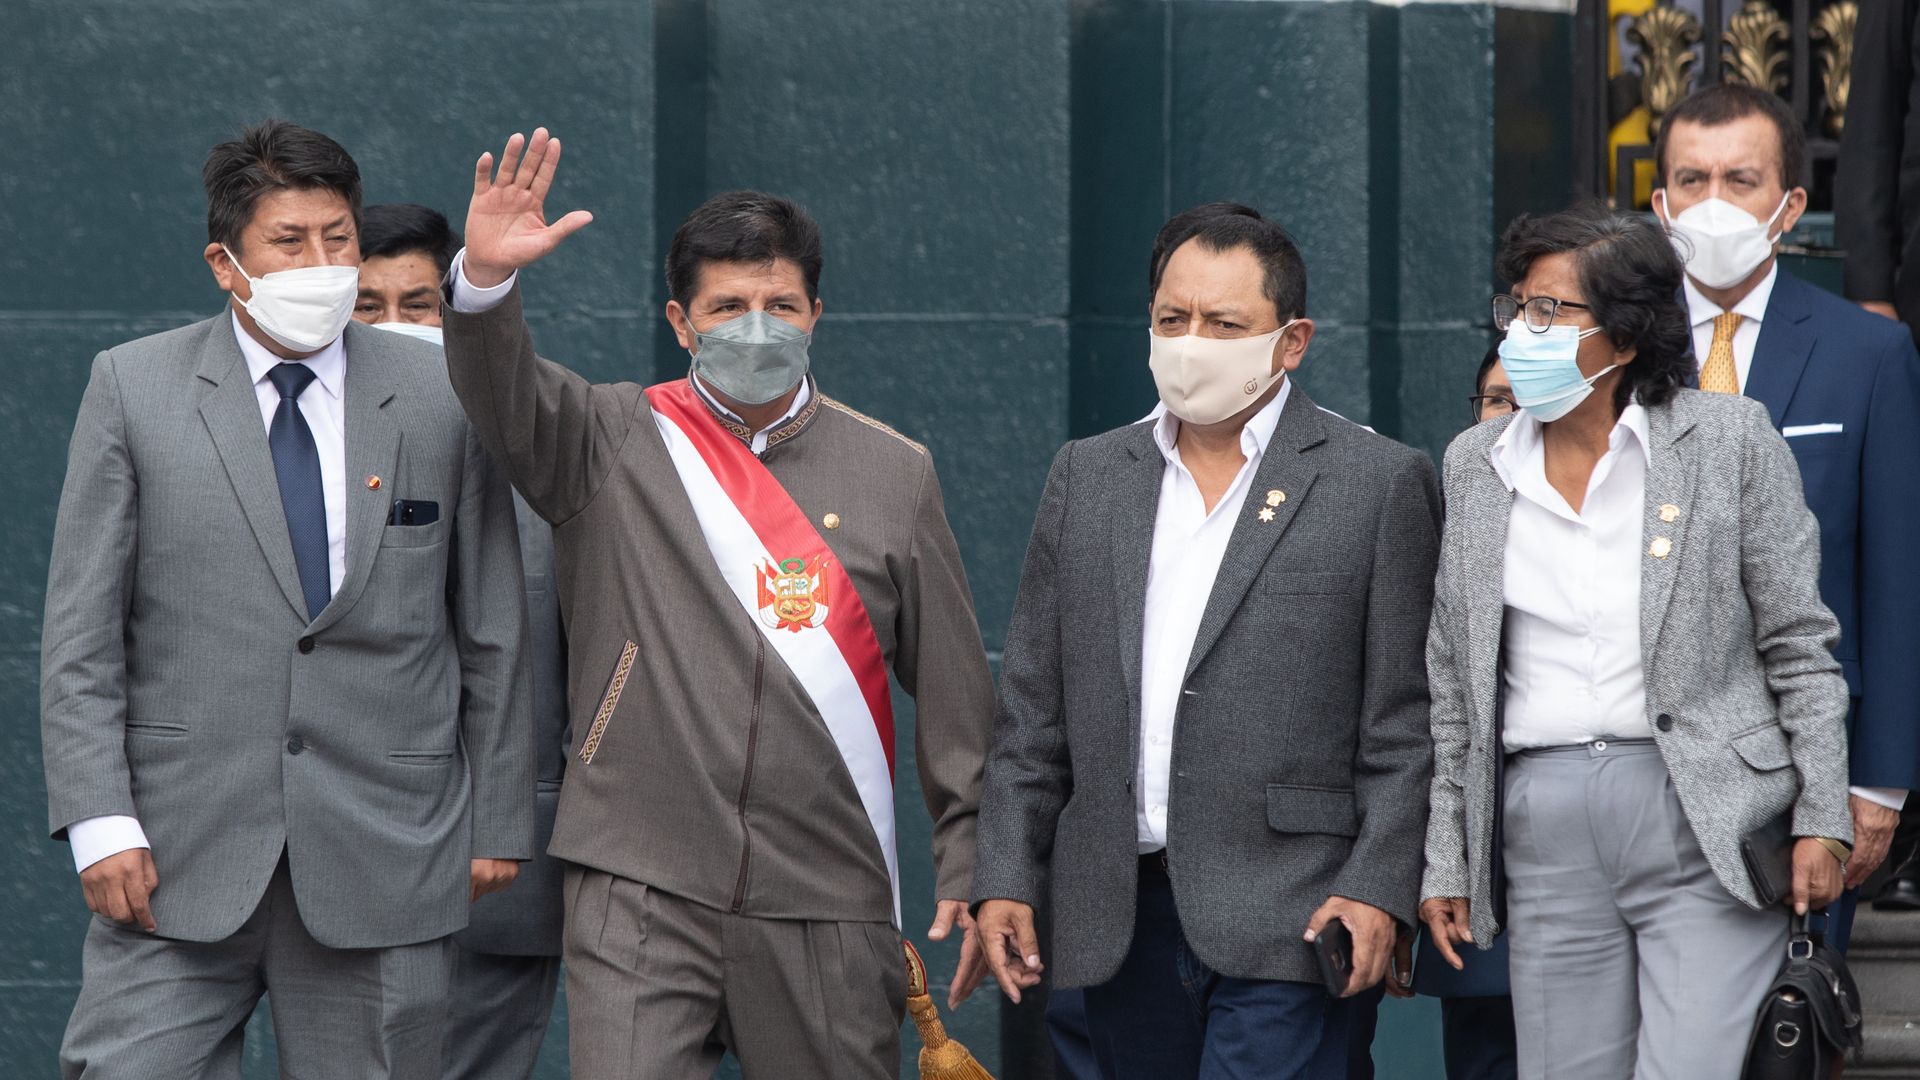 Pedro Castillo, Peru's president, center, leaves for an impeachment hearing at the Congress of the Republic in Lima, Peru, on Monday, March 28.